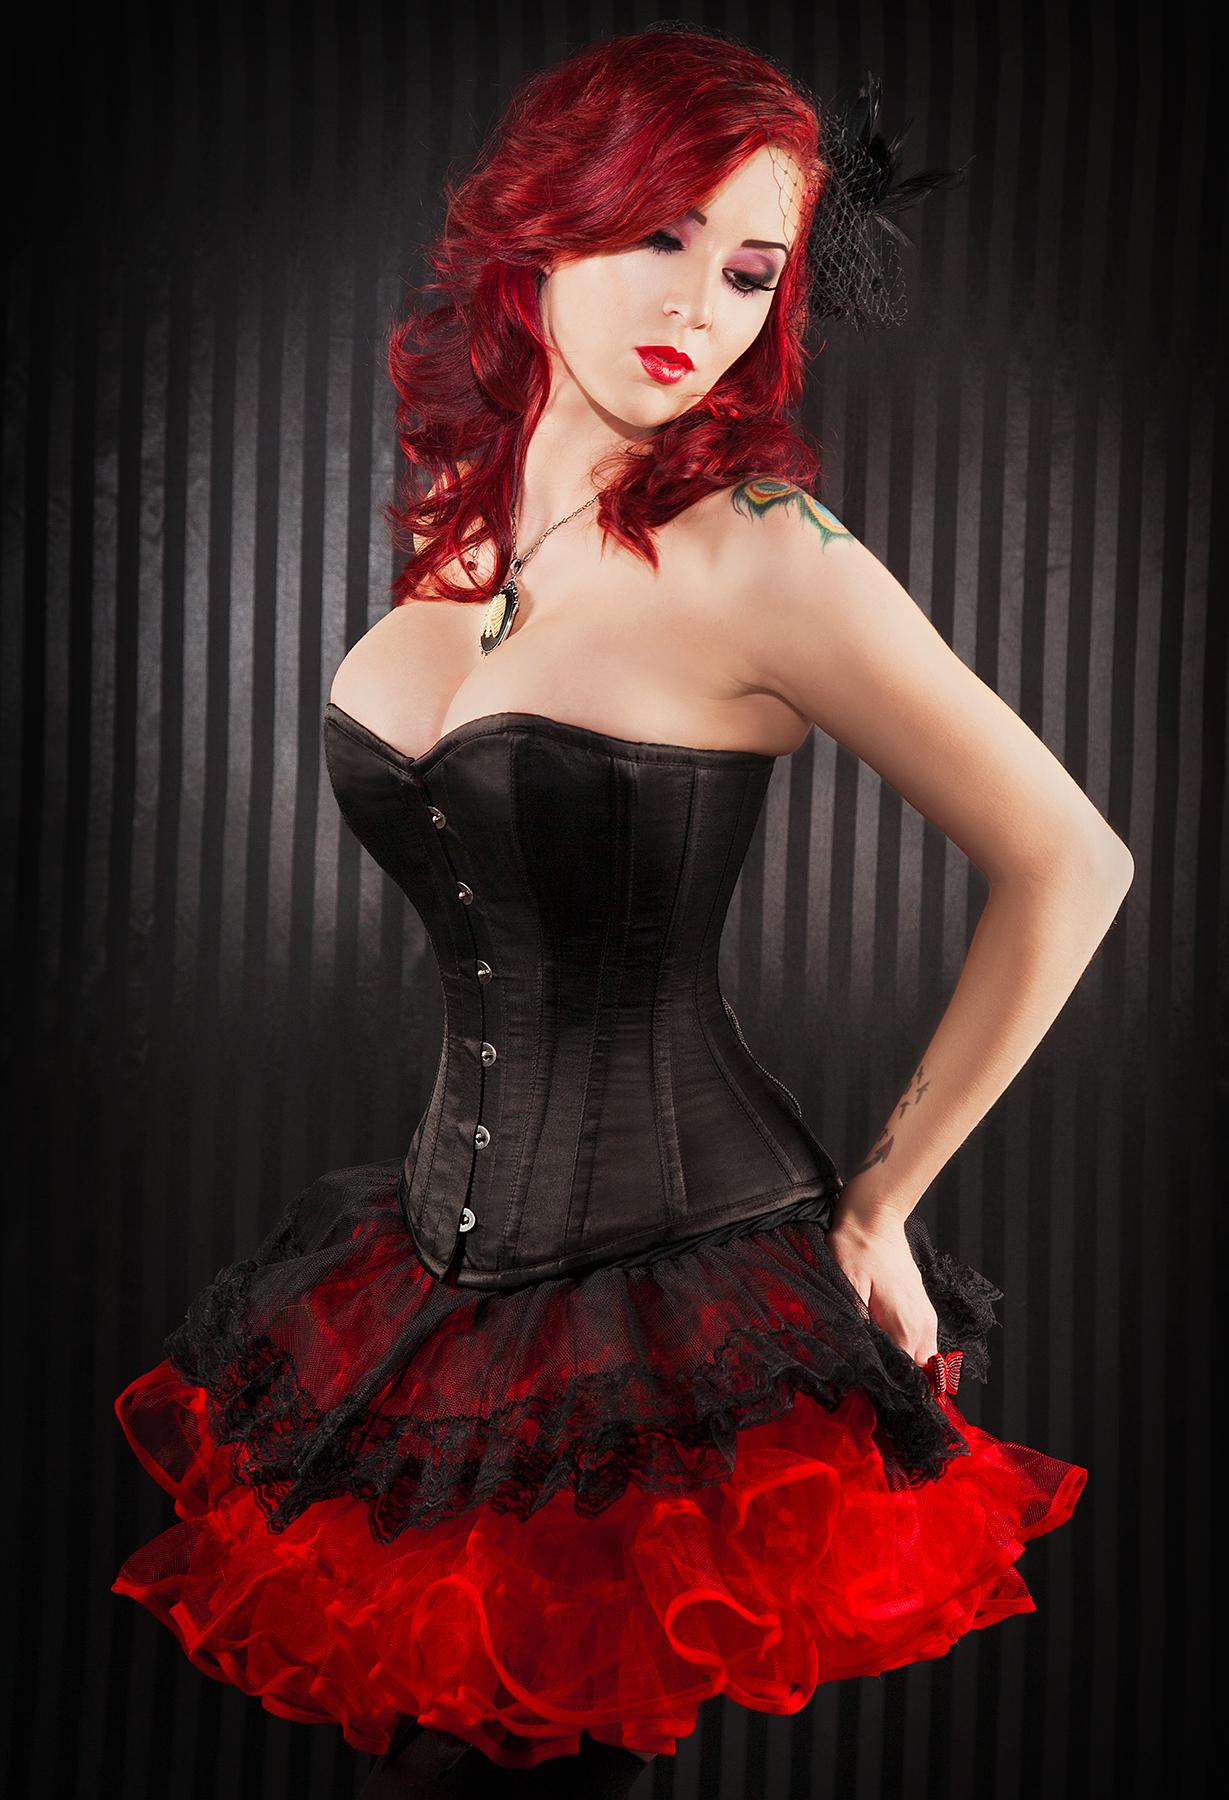 Overbust satin corset with classic busk. Gothic Victorian